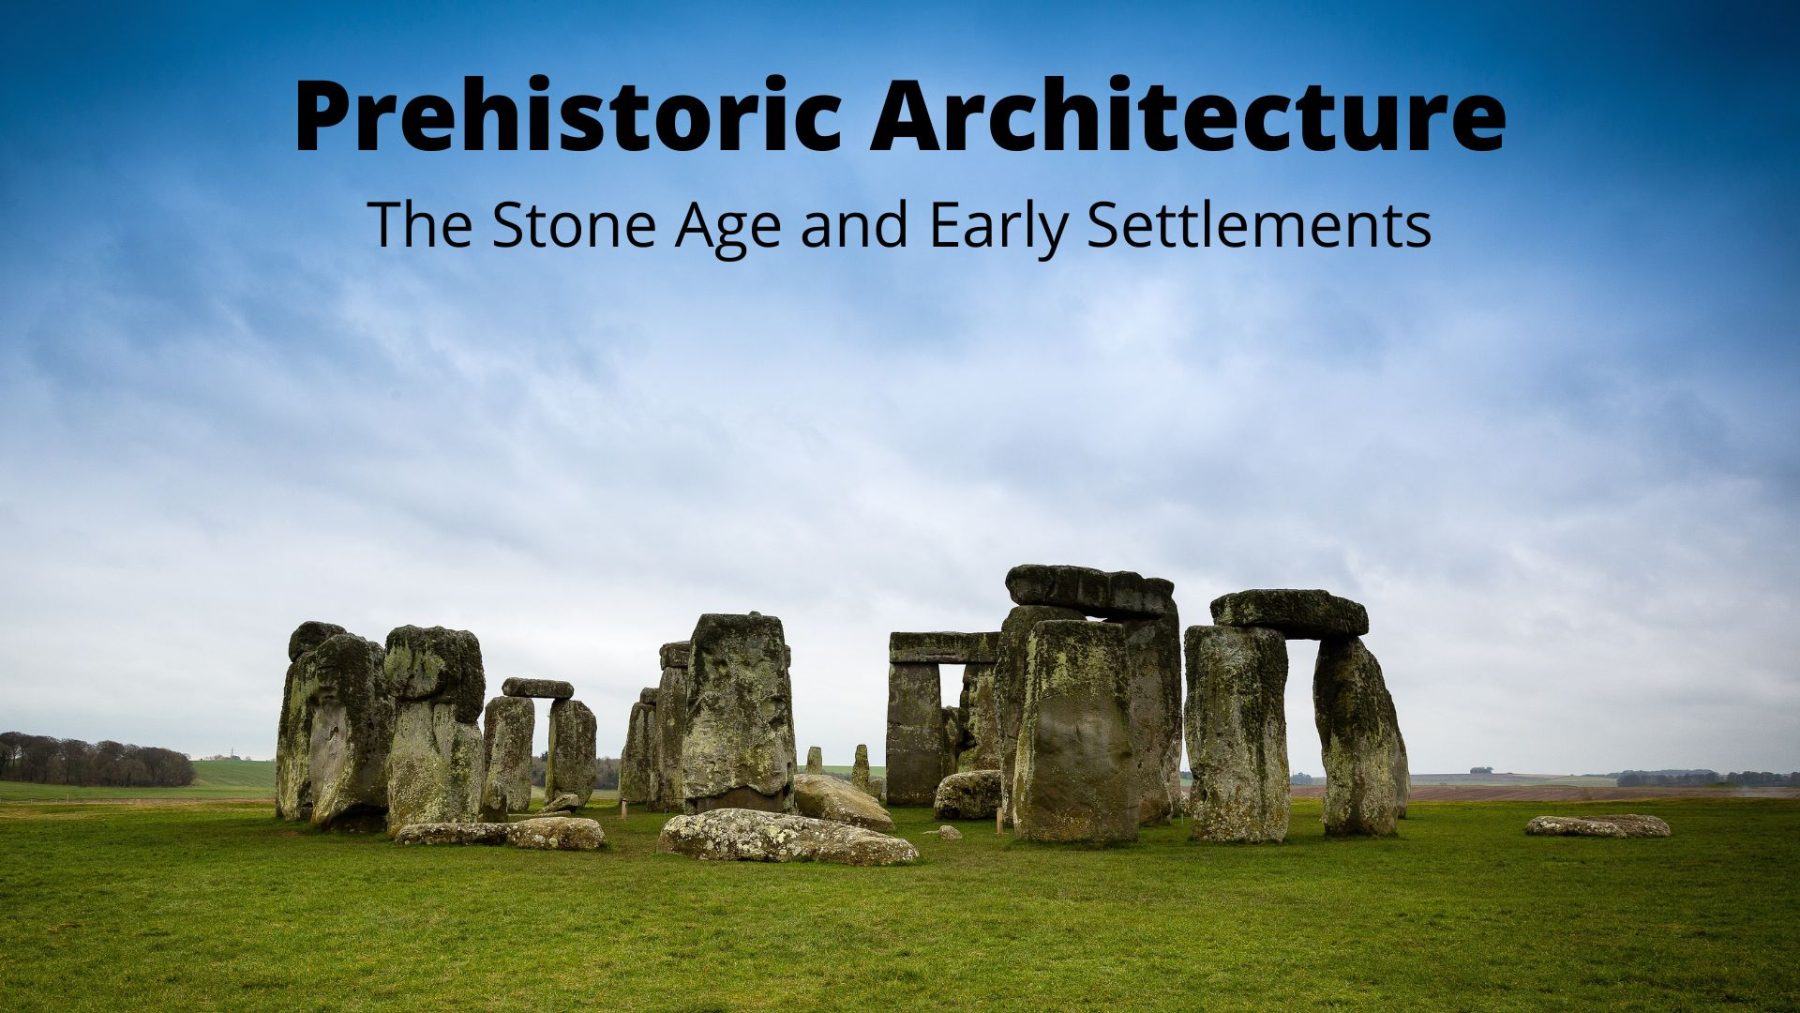 Prehistoric Architecture – The Stone Age and Valuable Insights of 3 Early Settlements